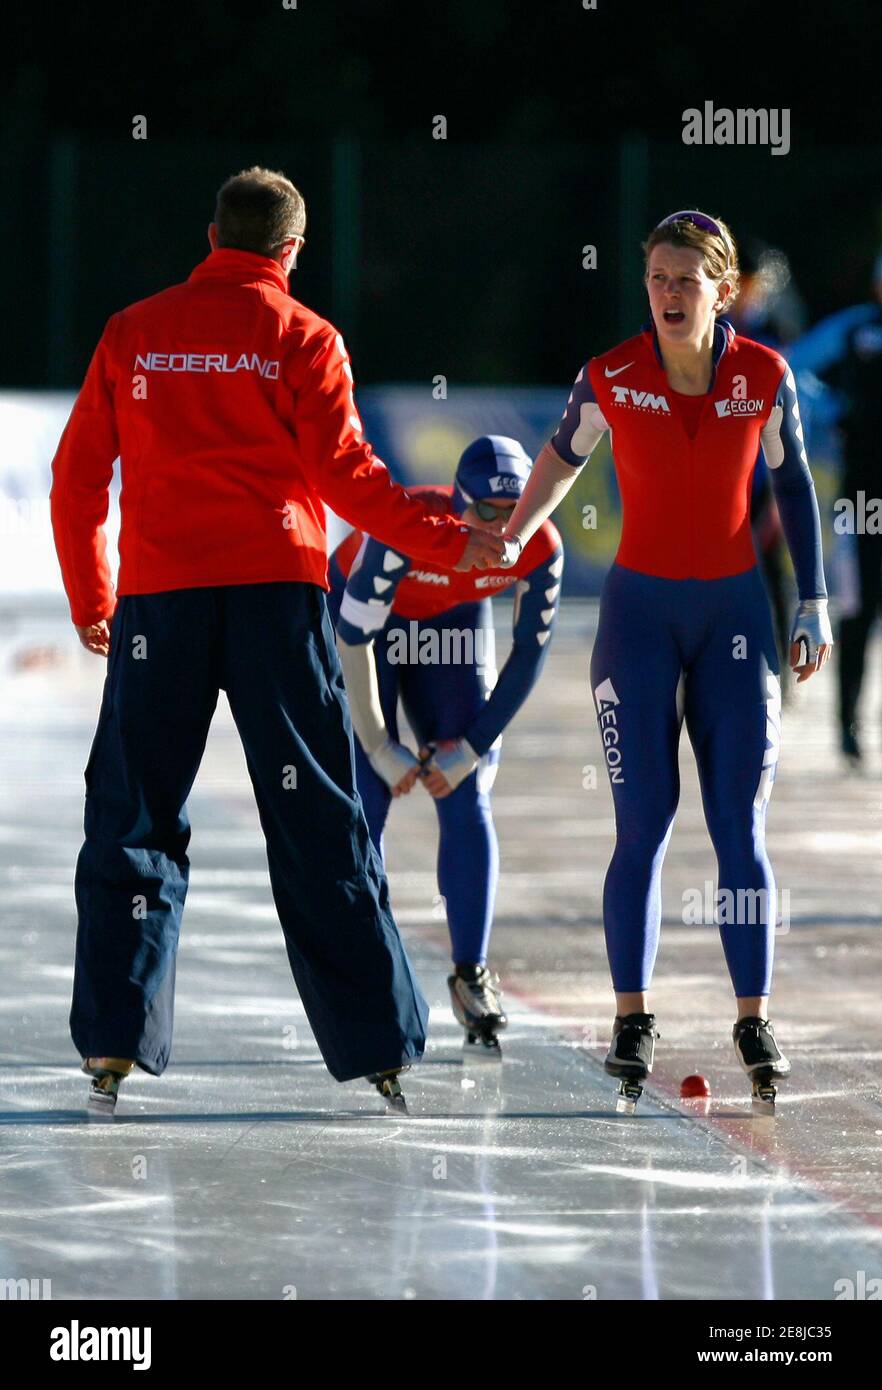 Ireen Wust (R) of the Netherlands shakes hands with her coach Gerard Kemkers after the women's 1500 meters European Speed Skating Championships race at the outdoor Ritten Arena in Collalbo, Italy January 13, 2007.       REUTERS/Jerry Lampen (ITALY) Stock Photo